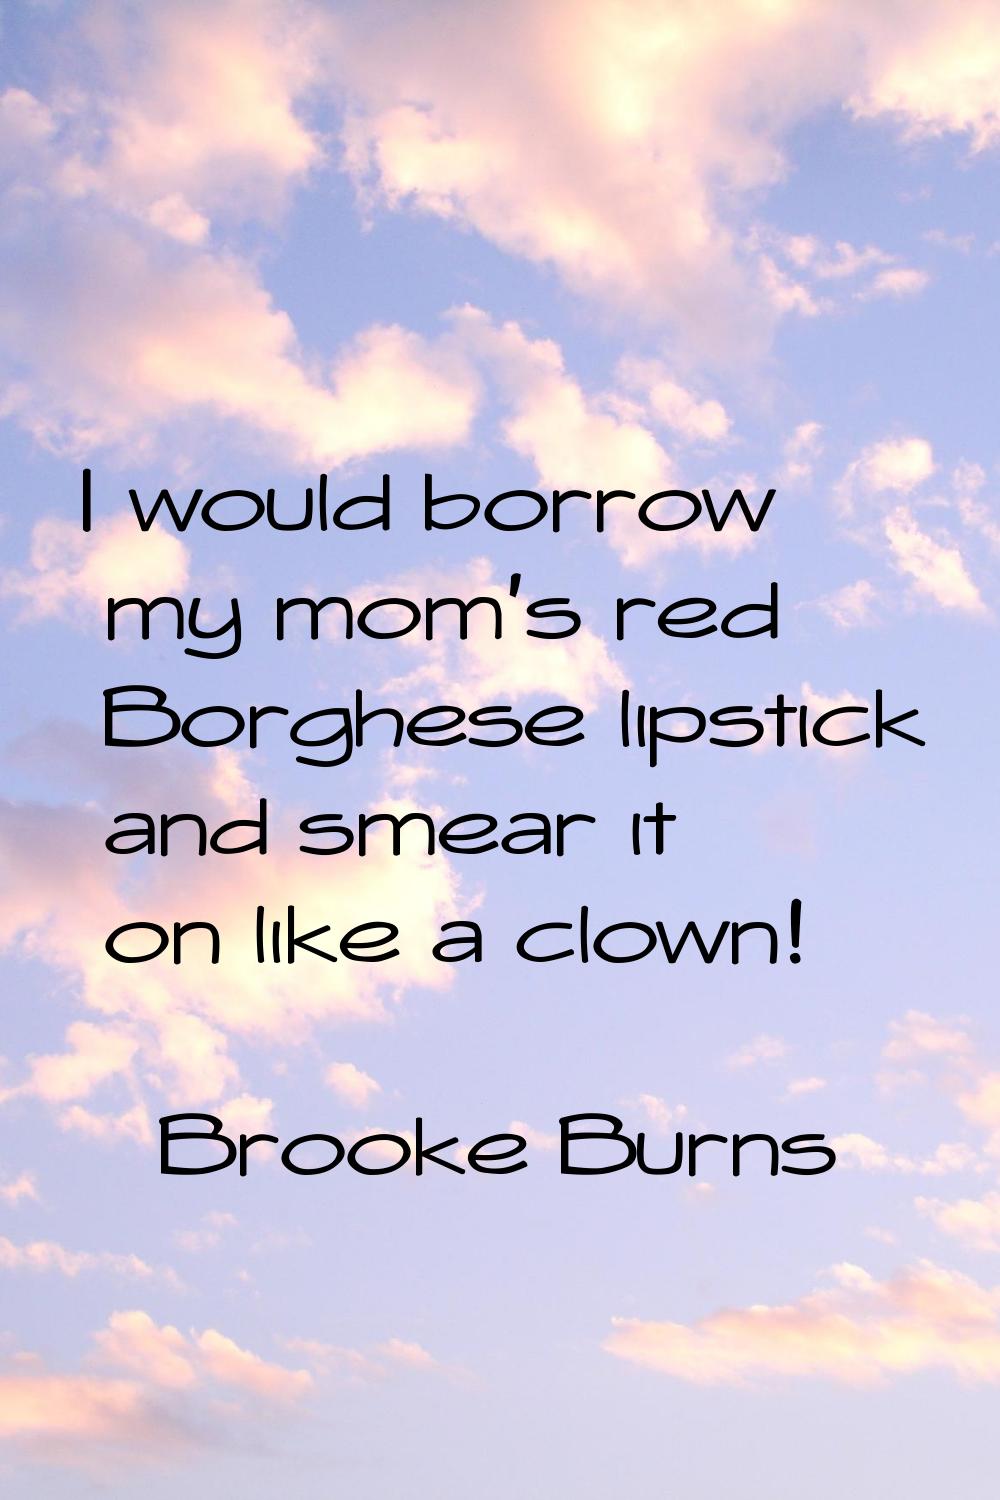 I would borrow my mom's red Borghese lipstick and smear it on like a clown!